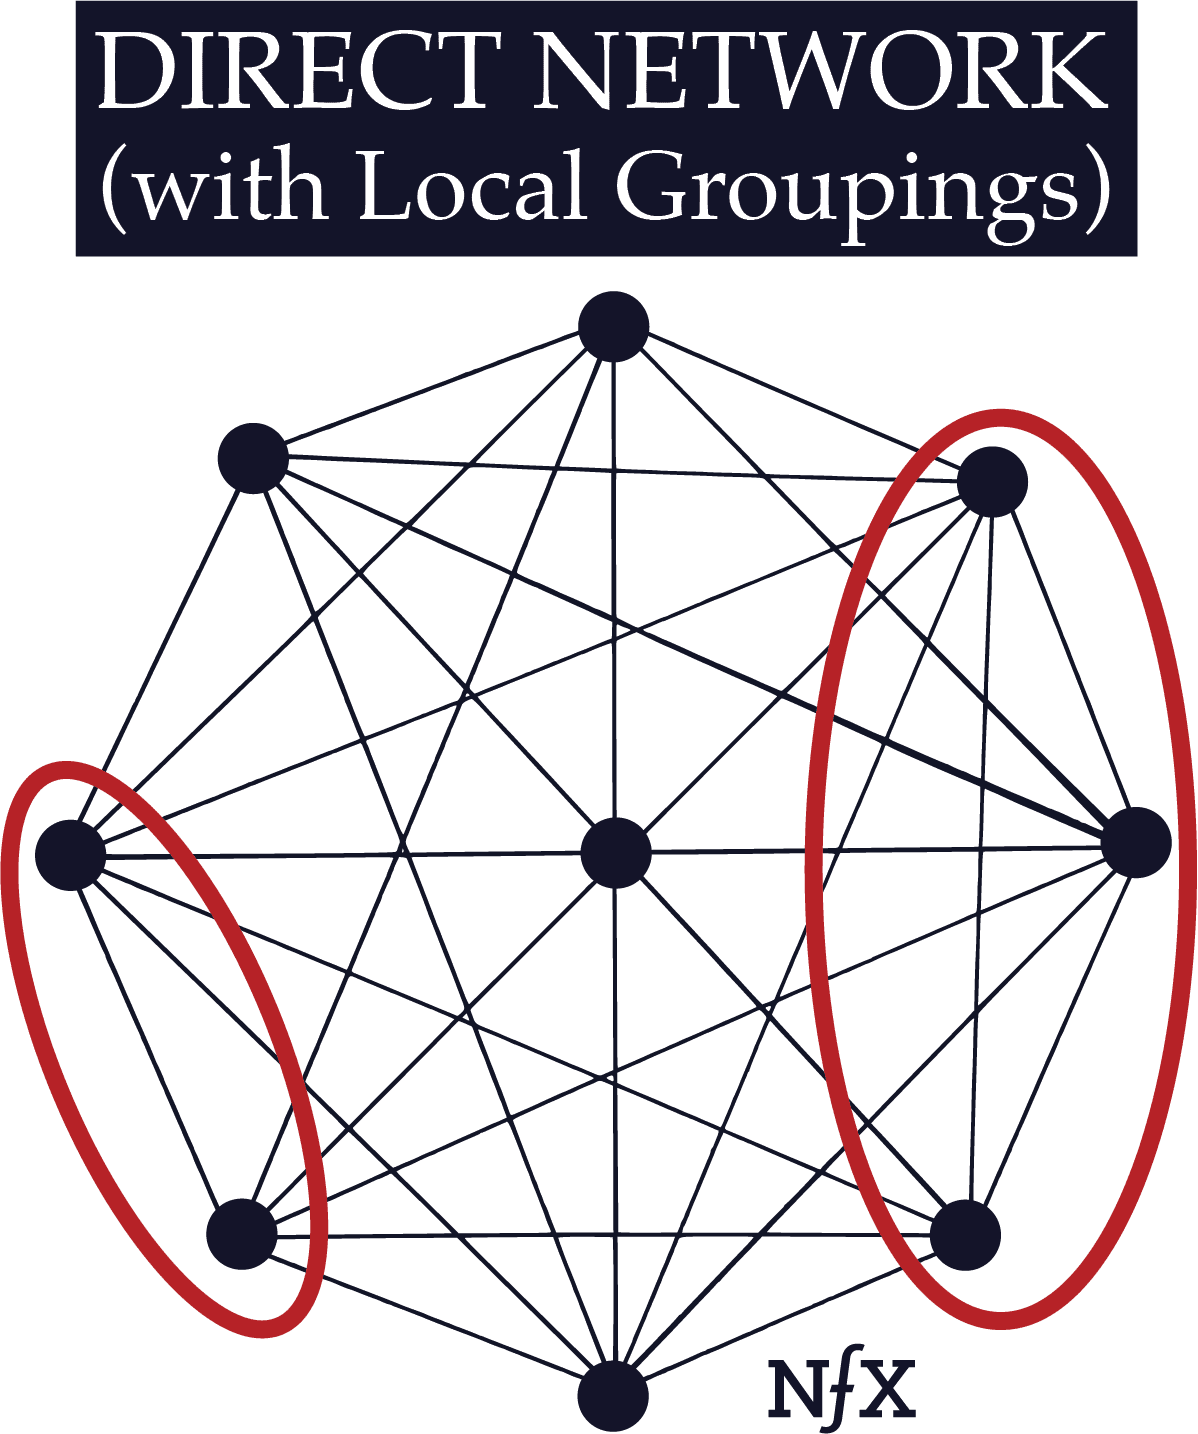 Direct Network with Local Groupings